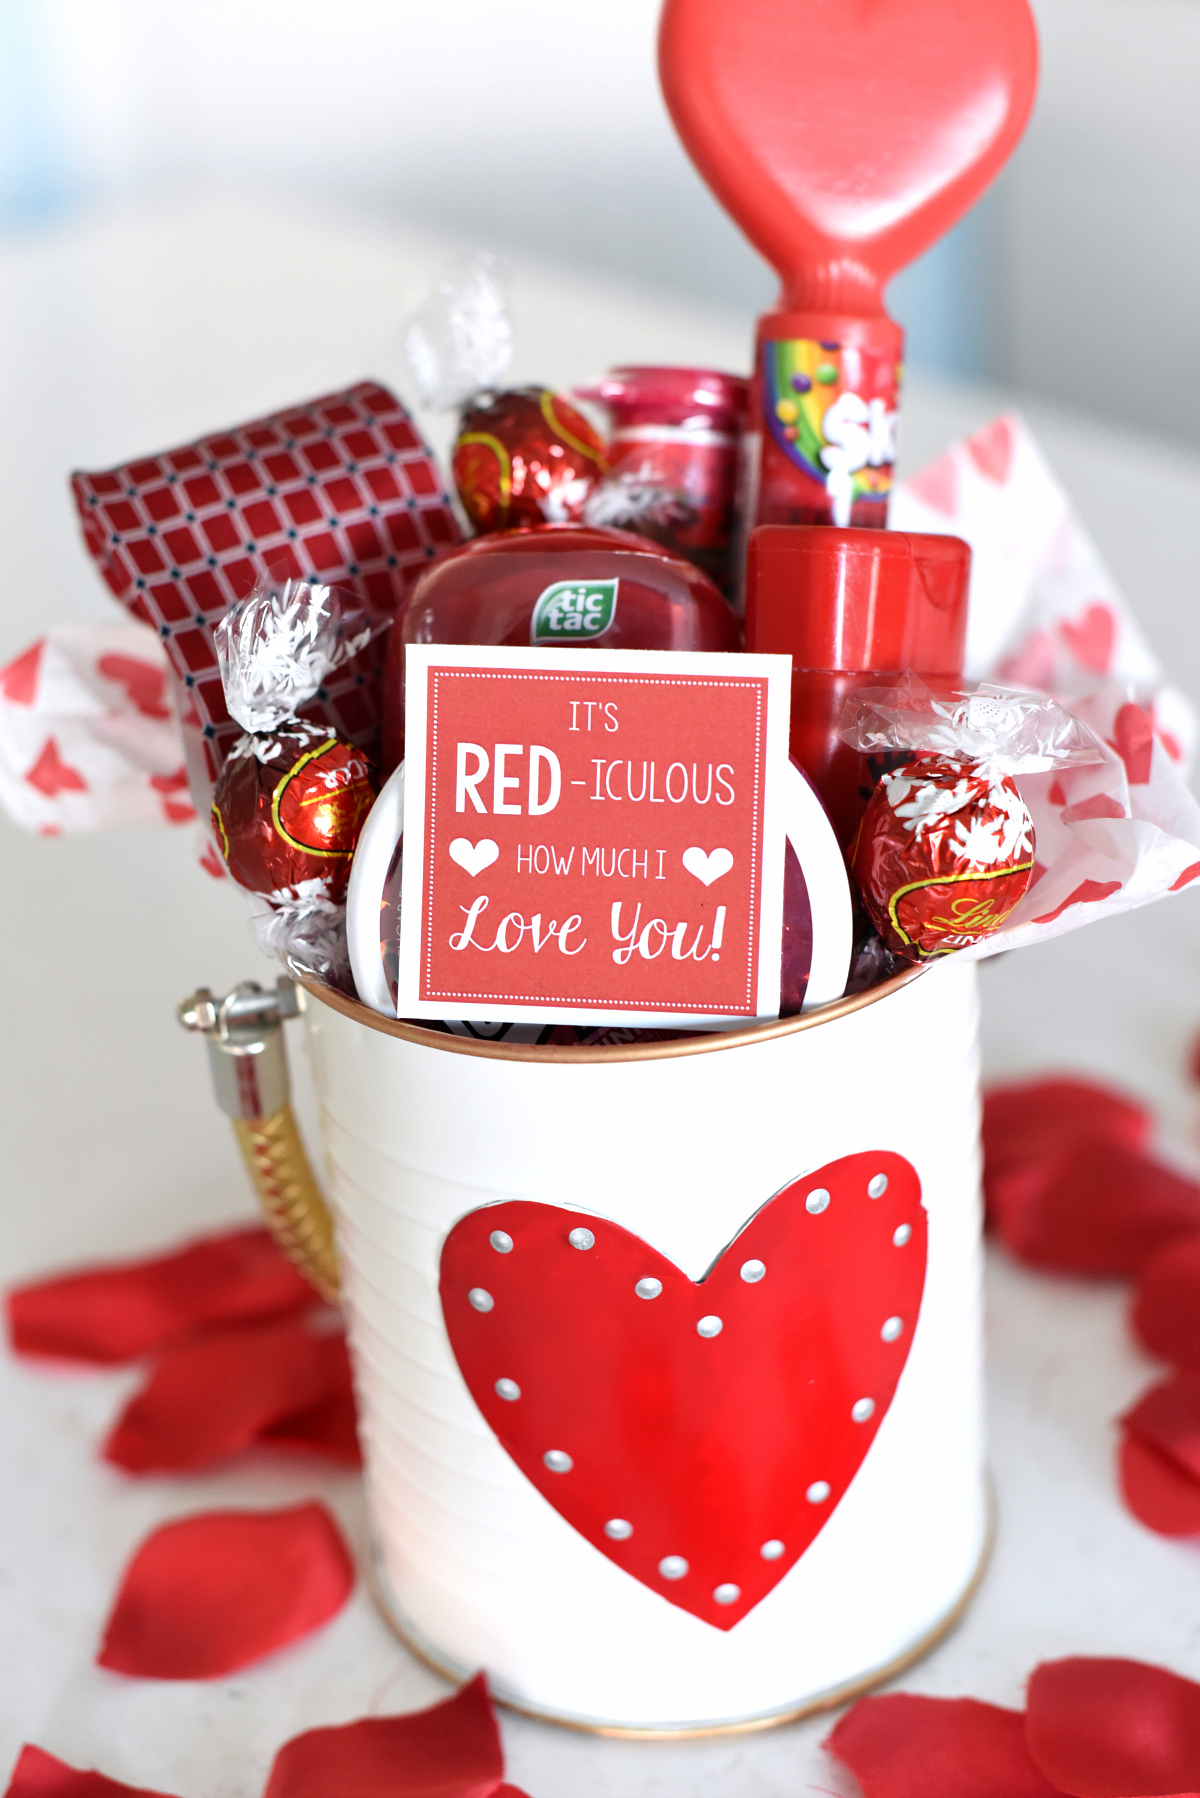 10 Most Recommended Valentines Day Ideas For Newlyweds fun ways to make valentines day special for your spouse fun squared 2022